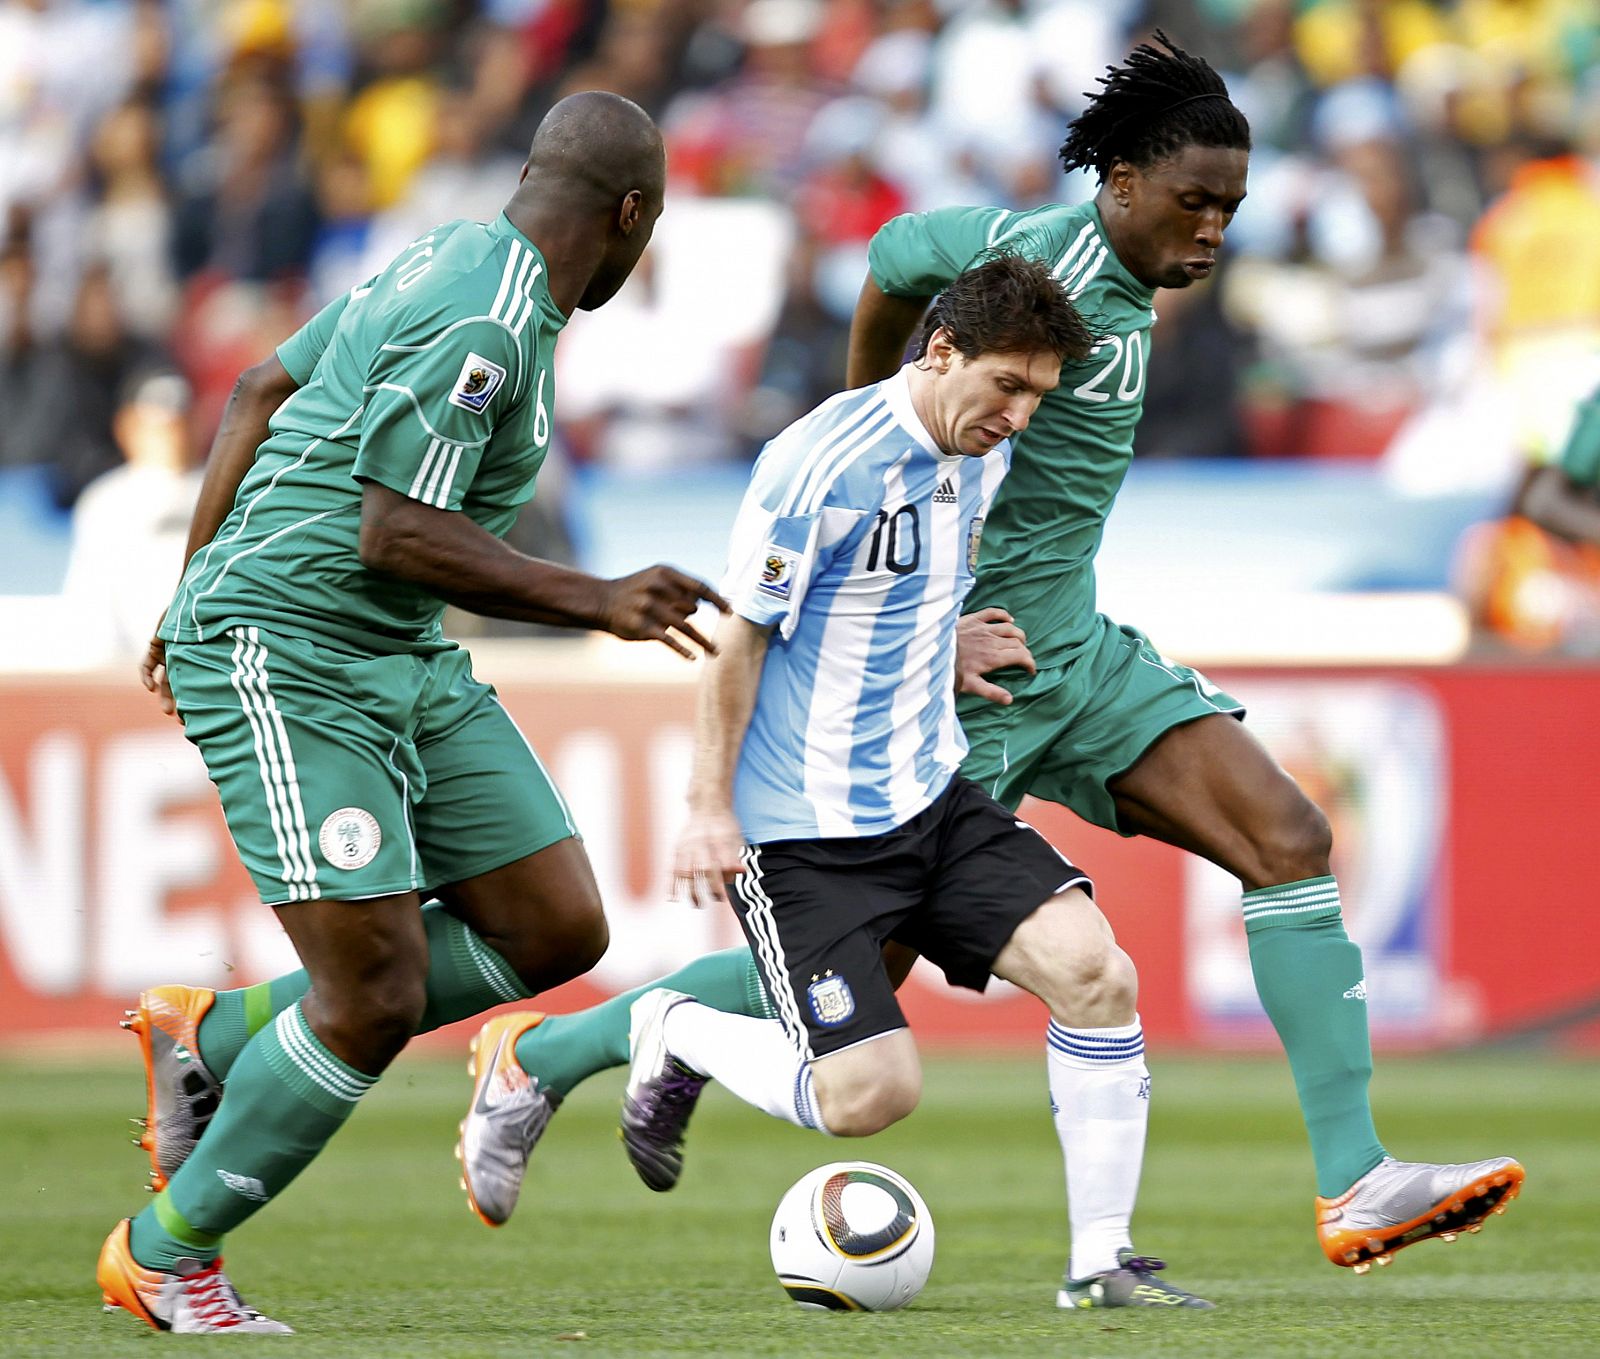 Argentina's Messi fights for the ball with Nigeria's Etuhu during a 2010 World Cup Group B soccer match at Ellis Park stadium in Johannesburg